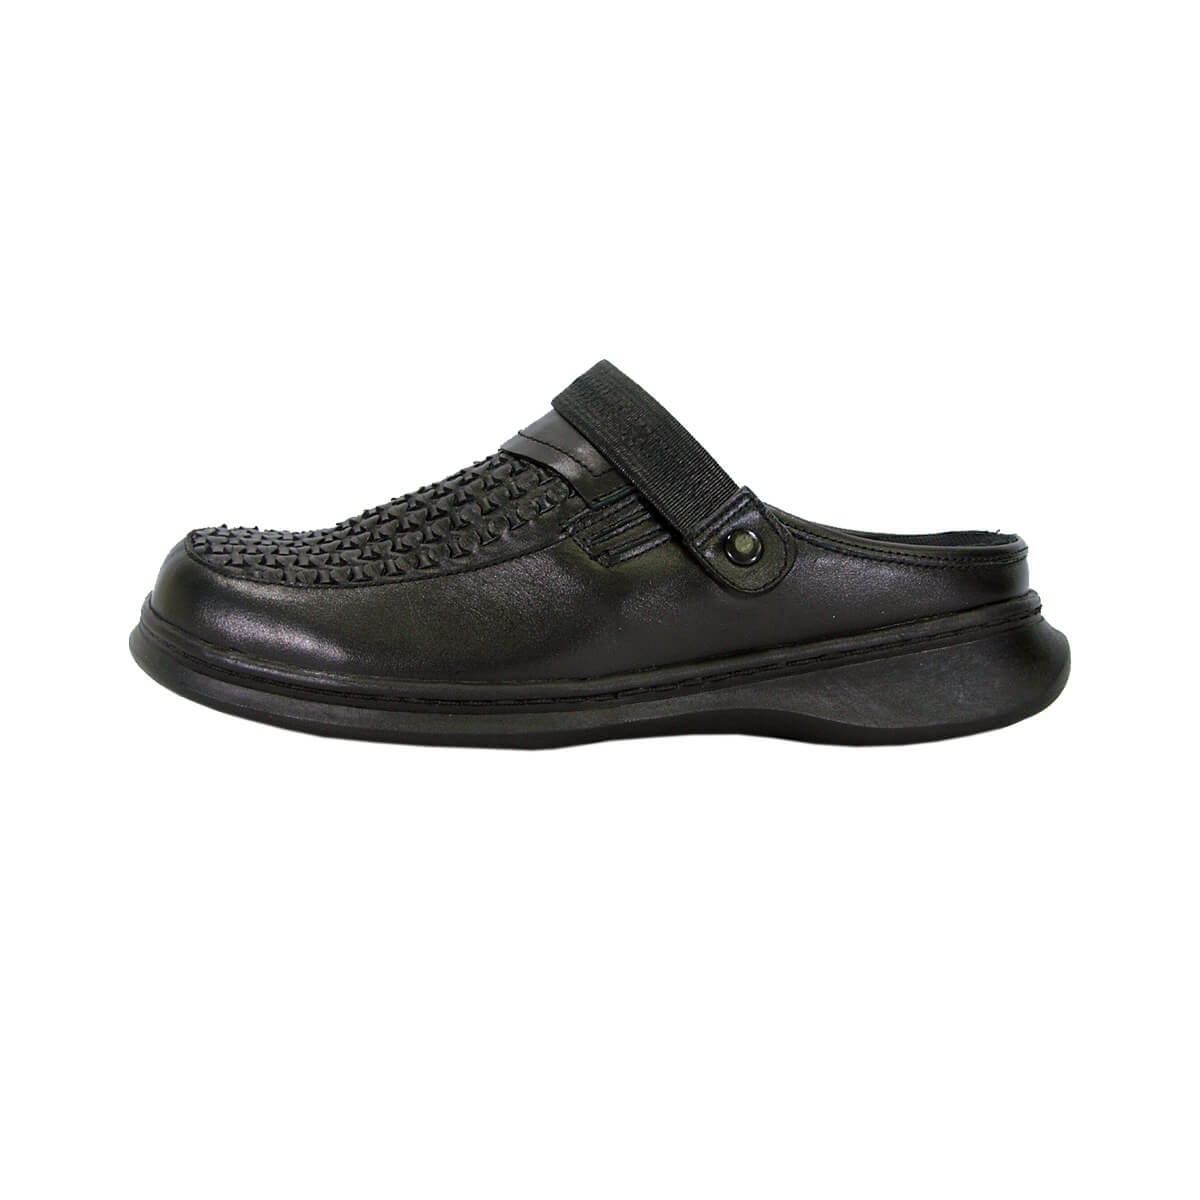 24 HOUR COMFORT Marcy Women's Wide Width Leather Clogs